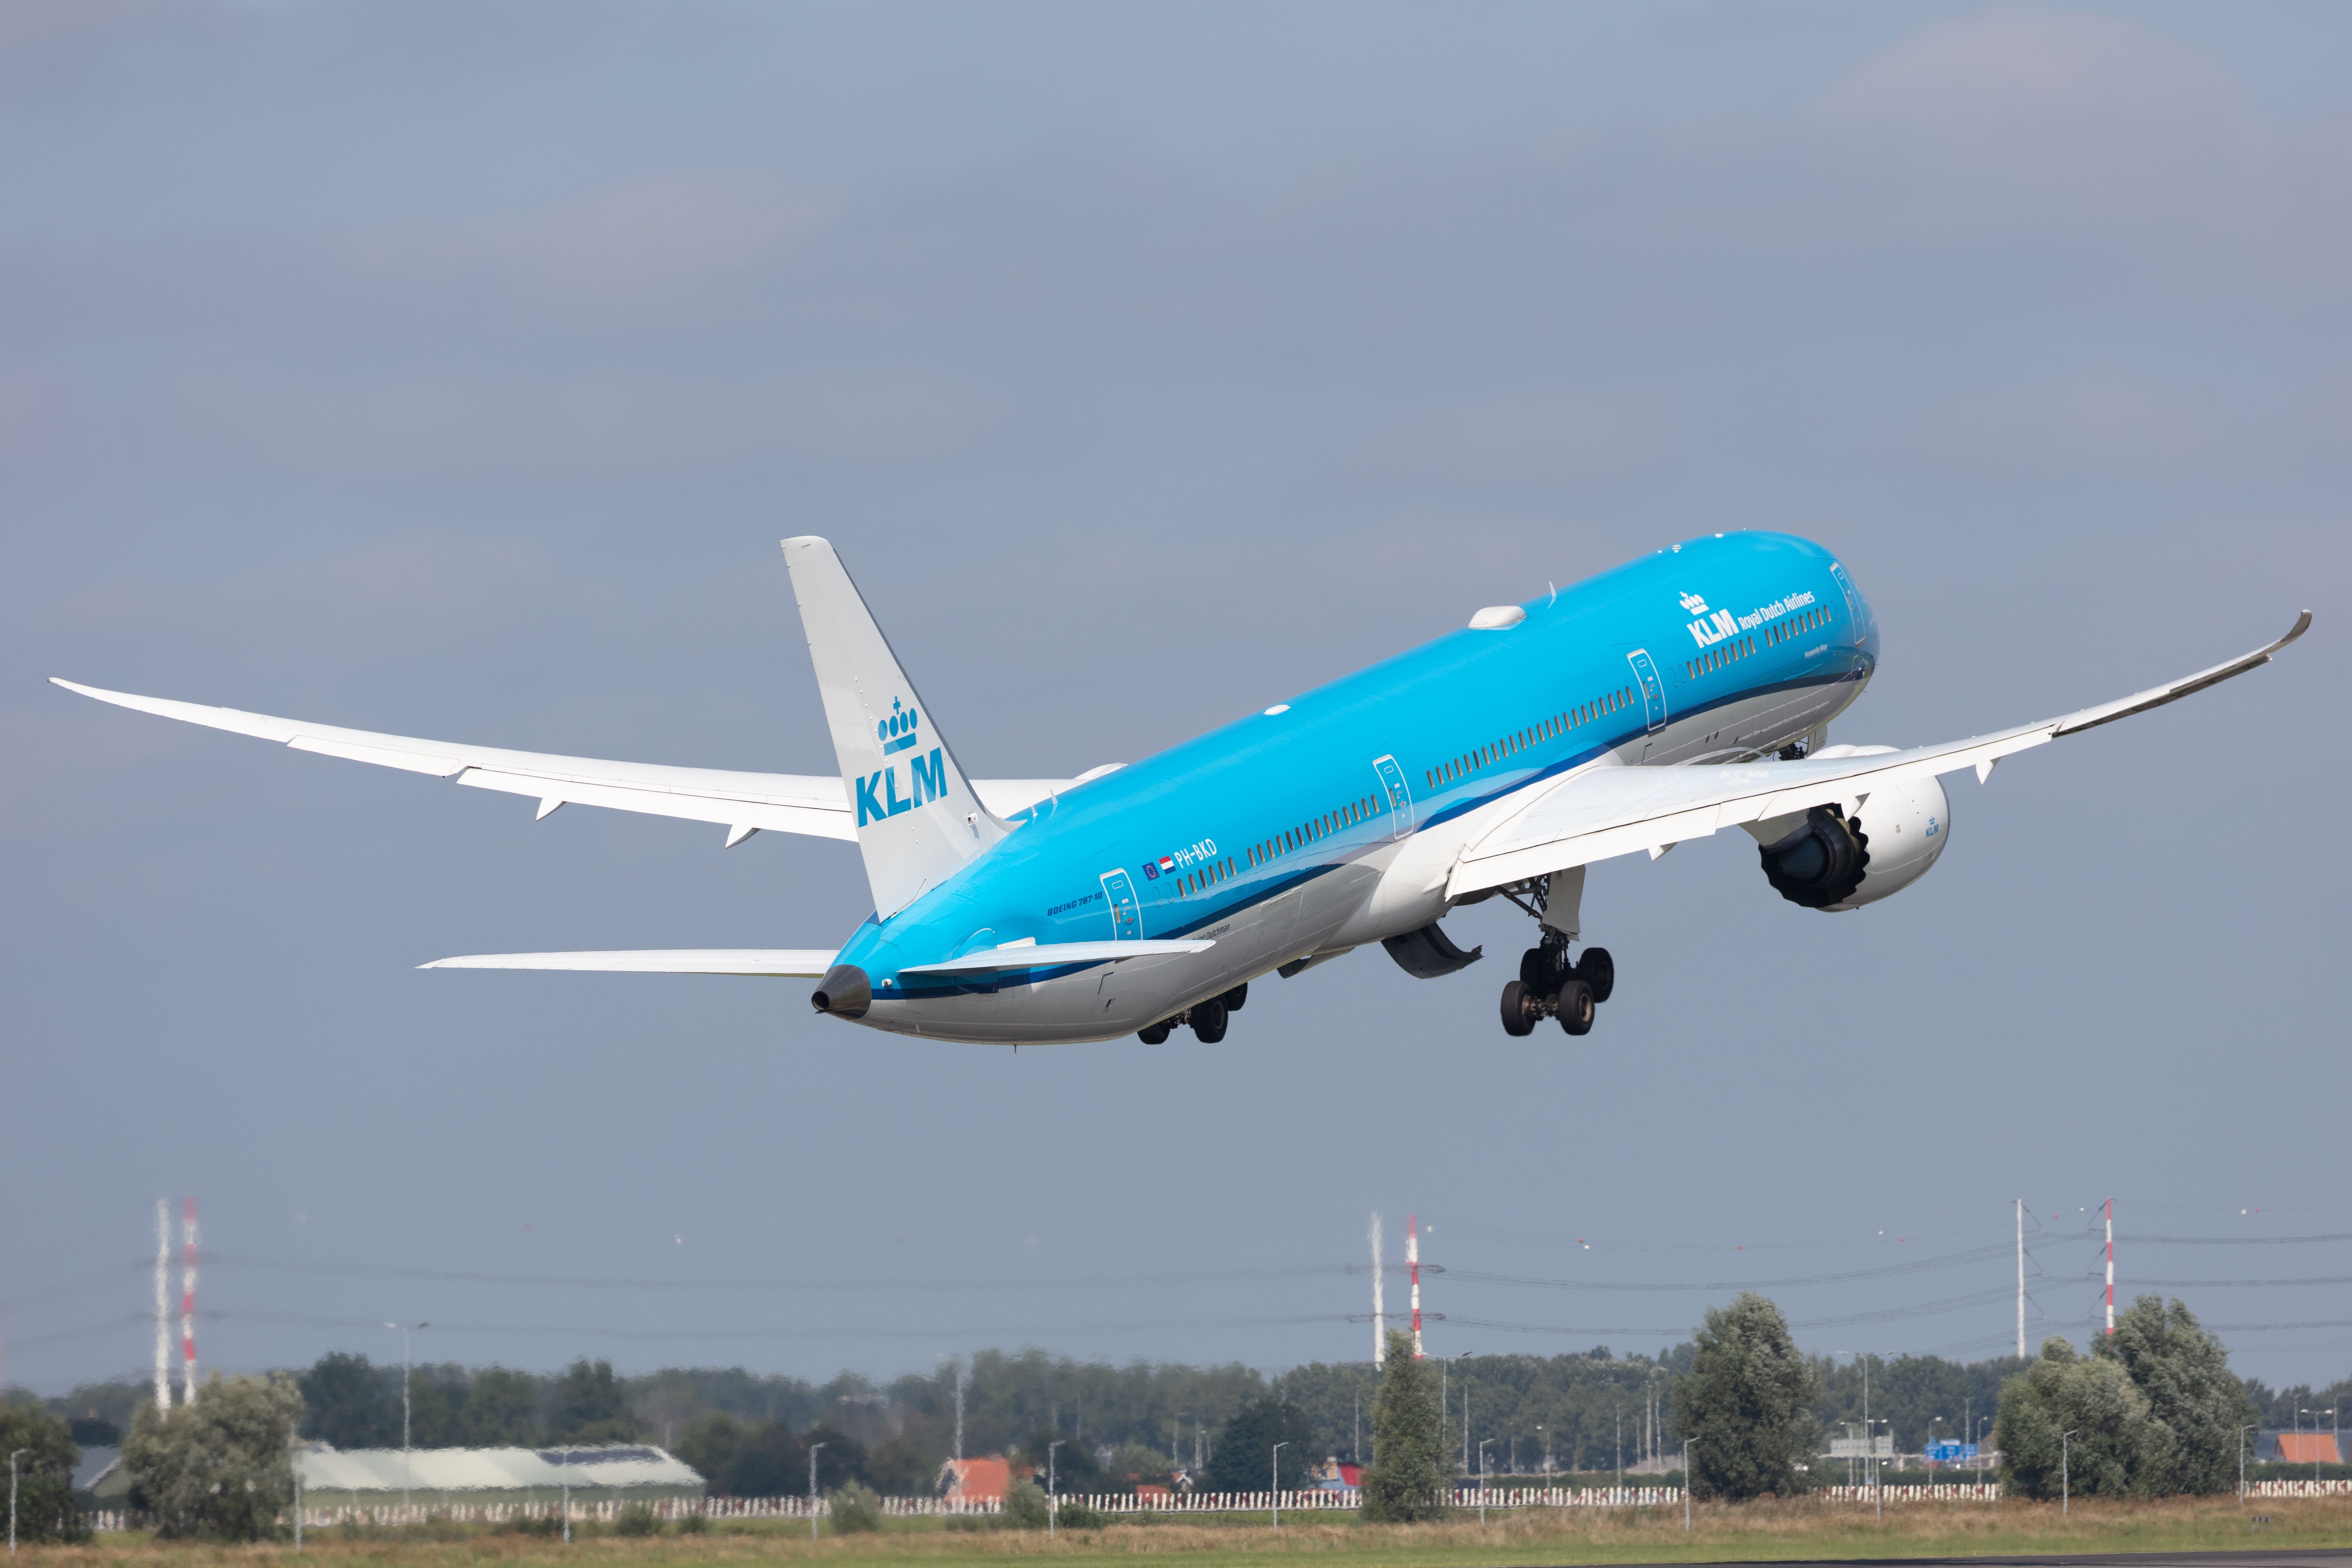 KLM Royal Dutch Airlines Boeing 787-10 Dreamliner departing from Amsterdam Schiphol Airport.